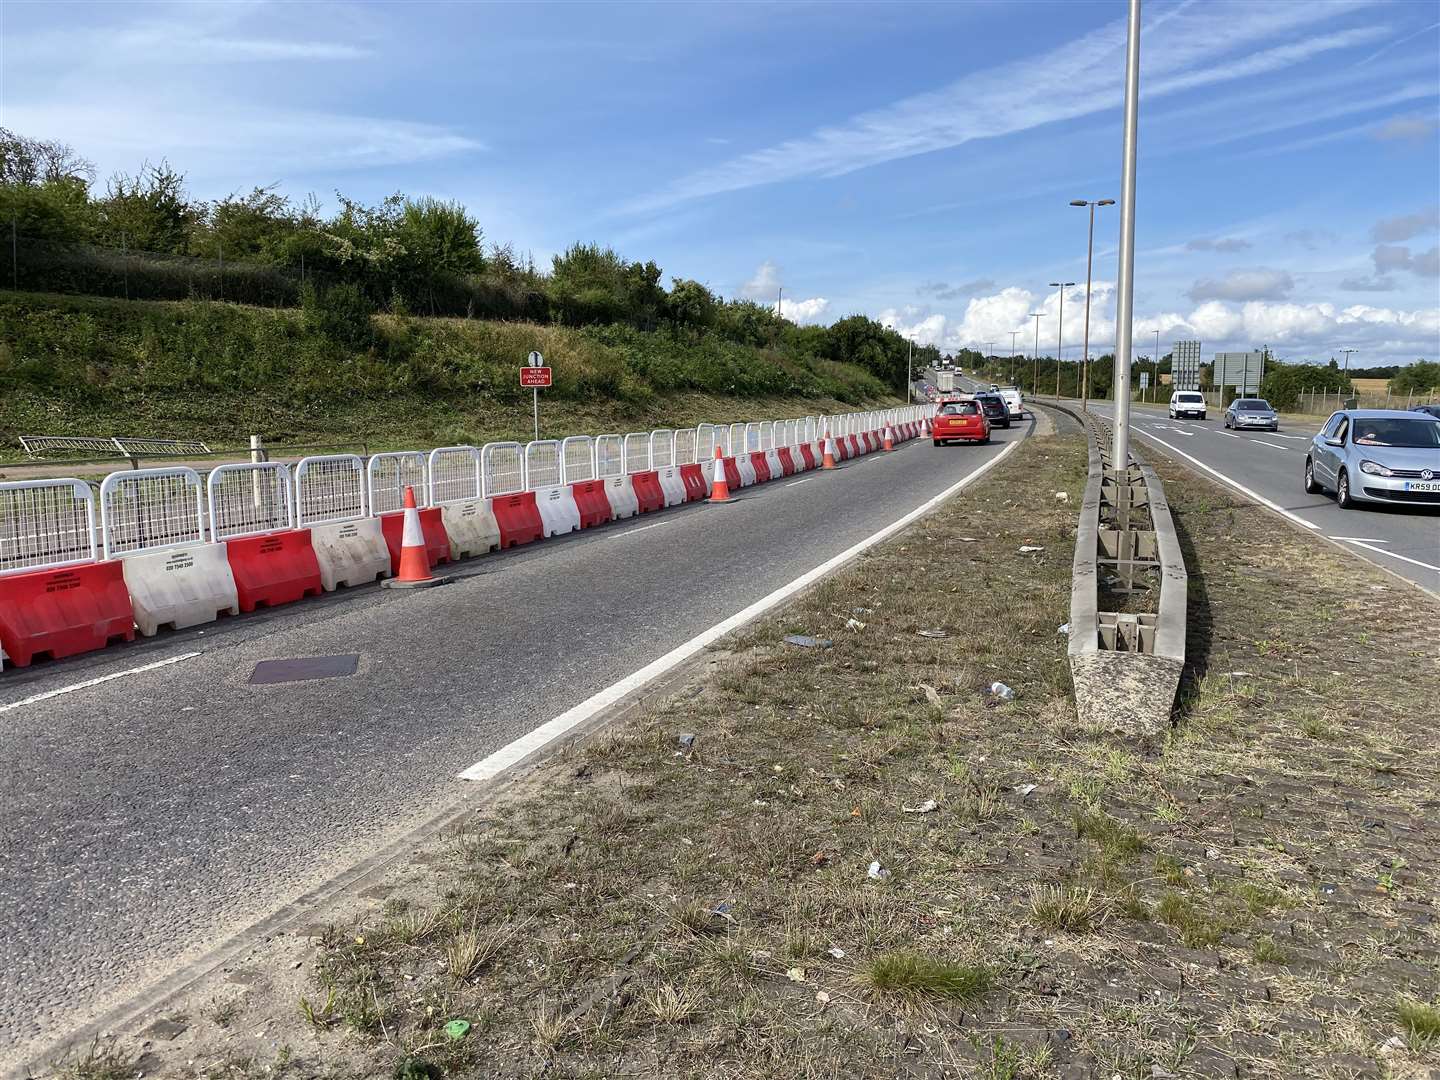 Roadworks to create a sliproad off the Medway City Estate on the Anthonys Way roundabout started as part of a £2m project to ease congestion